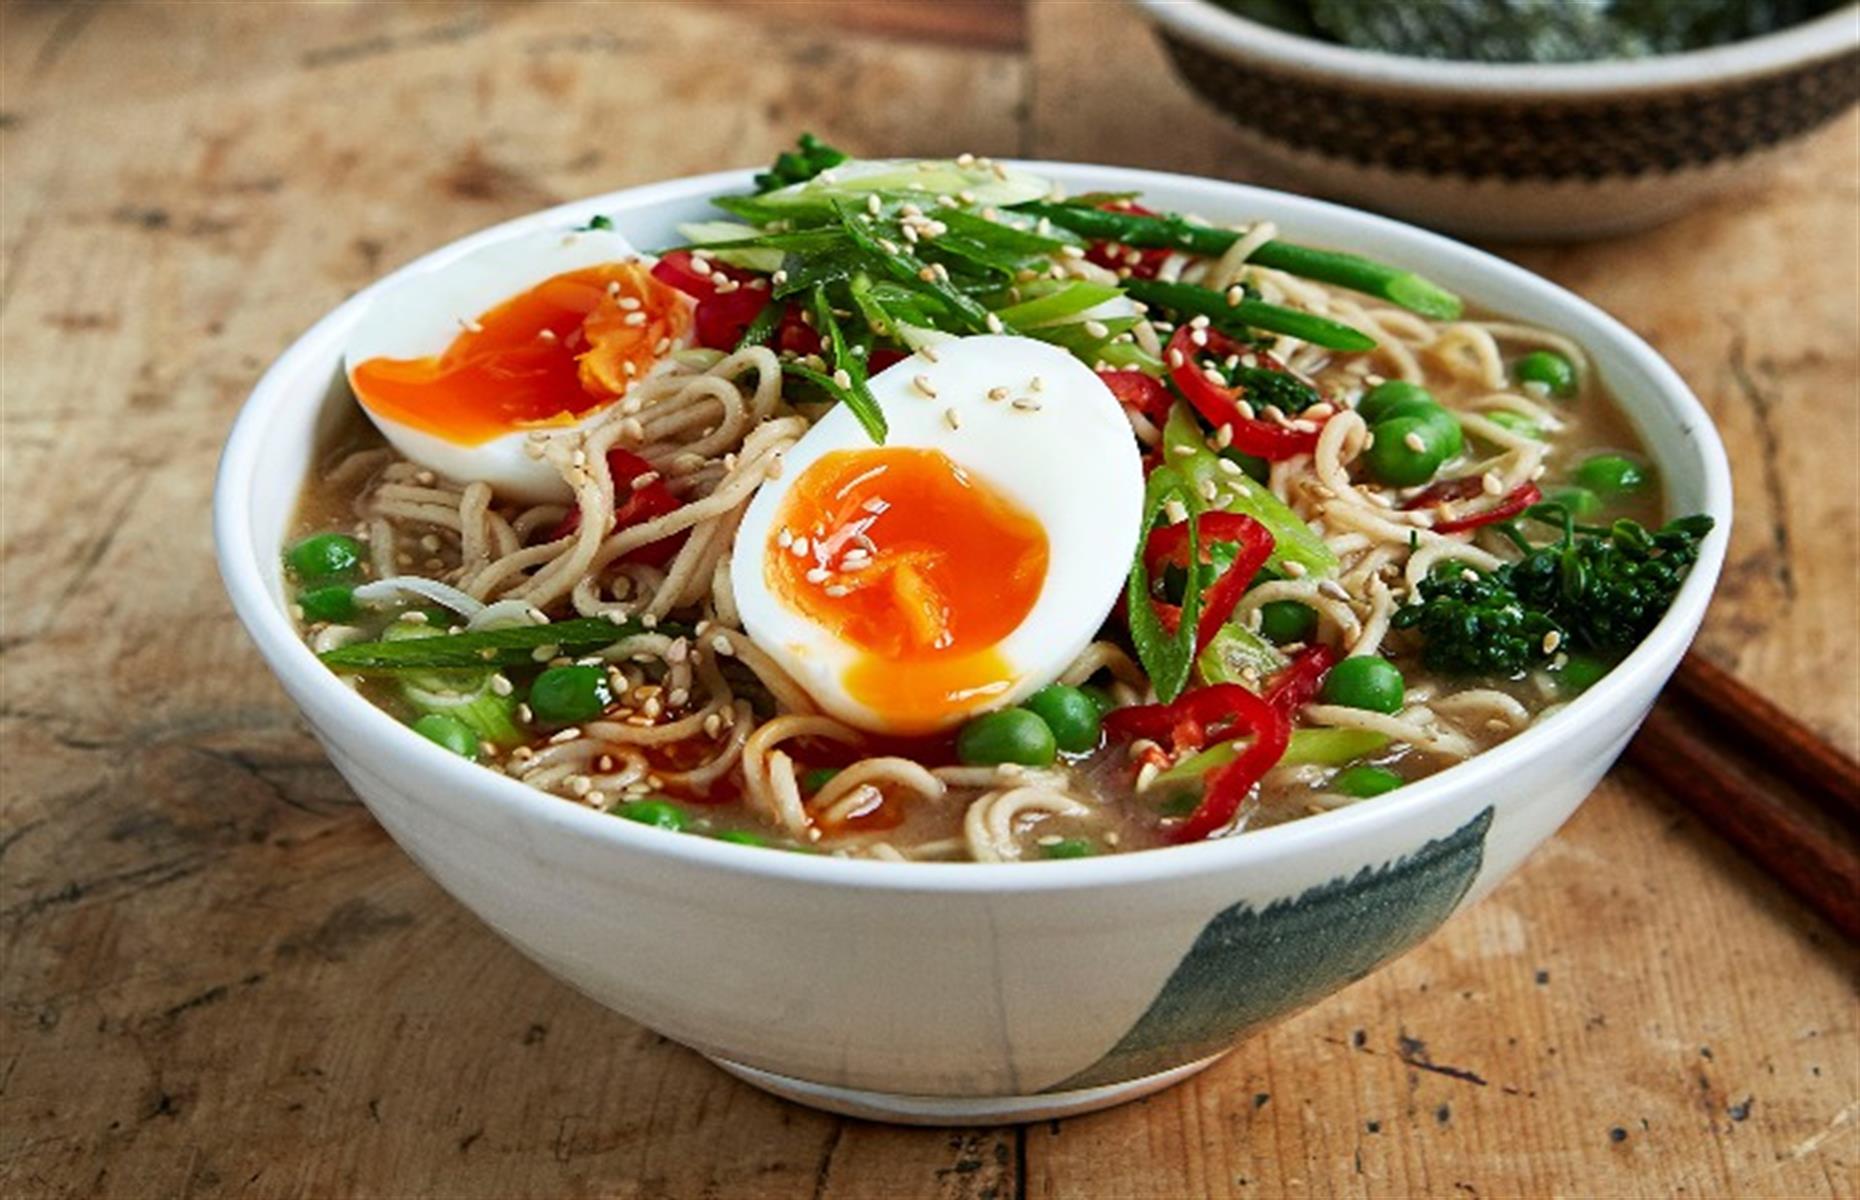 <p>Instant (or quick-cook) ramen noodles make a fast, hearty meal worthy of any noodle bar. This particular recipe uses frozen peas, but you can just throw in whichever vegetables you have to hand. A nourishing dinner will be on the table in just 15 minutes.</p>  <p><a href="https://www.lovefood.com/recipes/71836/miso-ramen-recipe"><strong>Get the recipe for miso ramen here</strong></a></p>  <p><strong><a href="http://bit.ly/39PqzTB">Love this? Follow our Pinterest page for more recipe inspiration</a></strong></p>